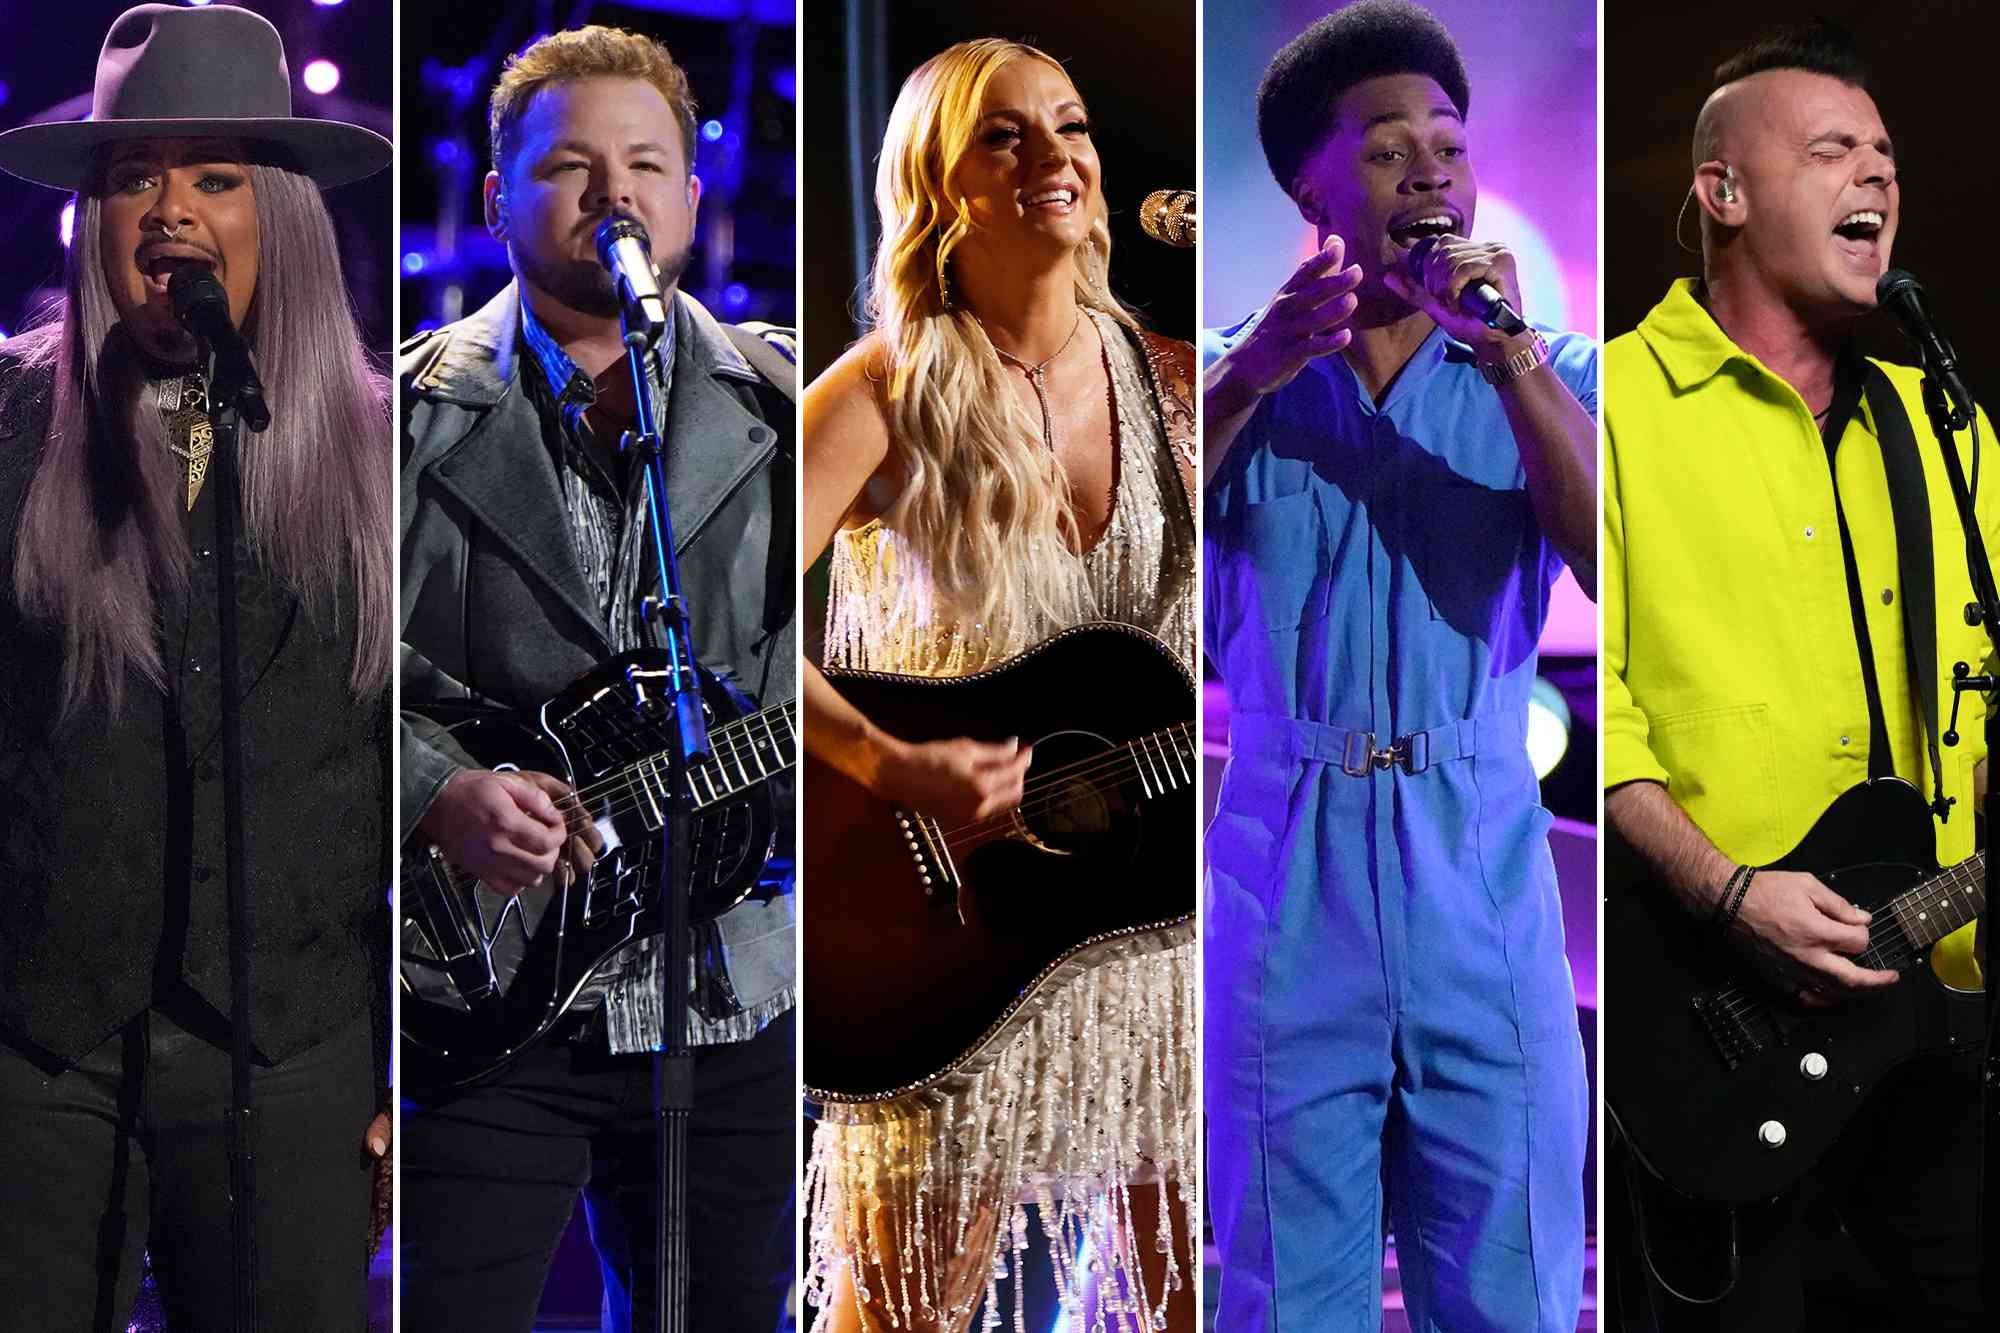 How to Vote for Your Favorite Contestants on “The Voice”